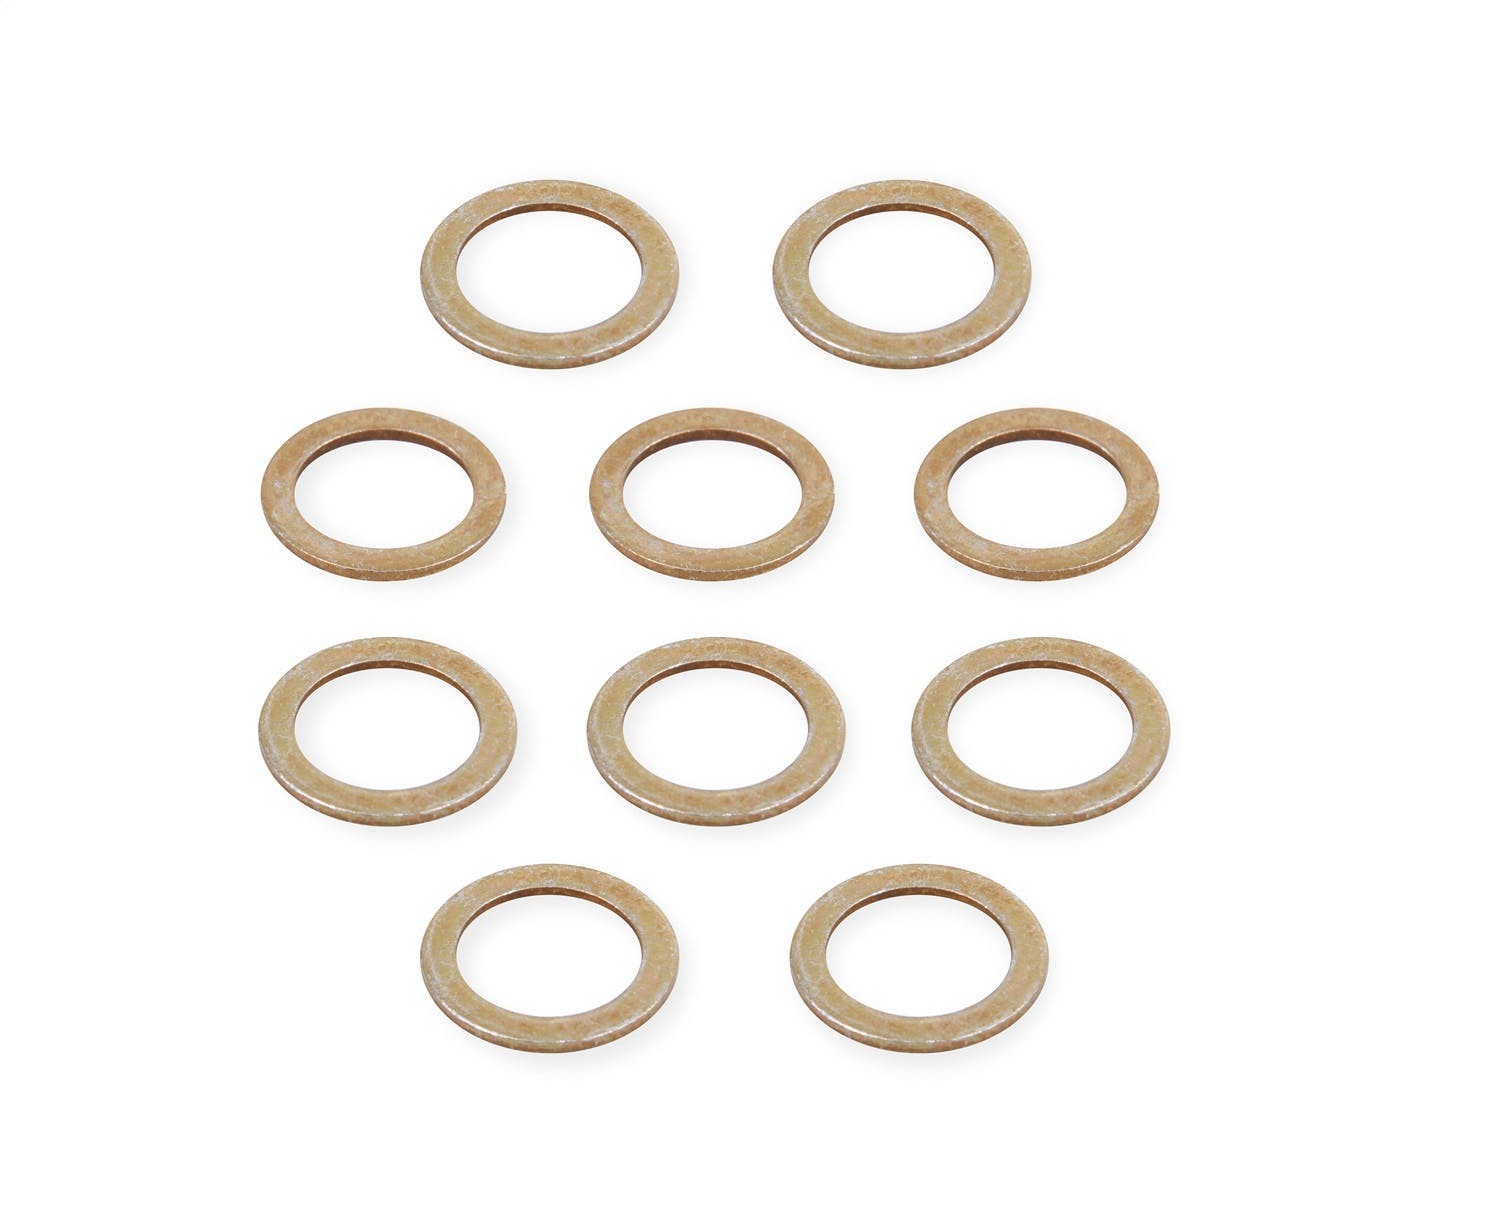 Earl's Performance Plumbing 177105ERL -5 COPPER CRUSH WASHER - PKG. OF 10